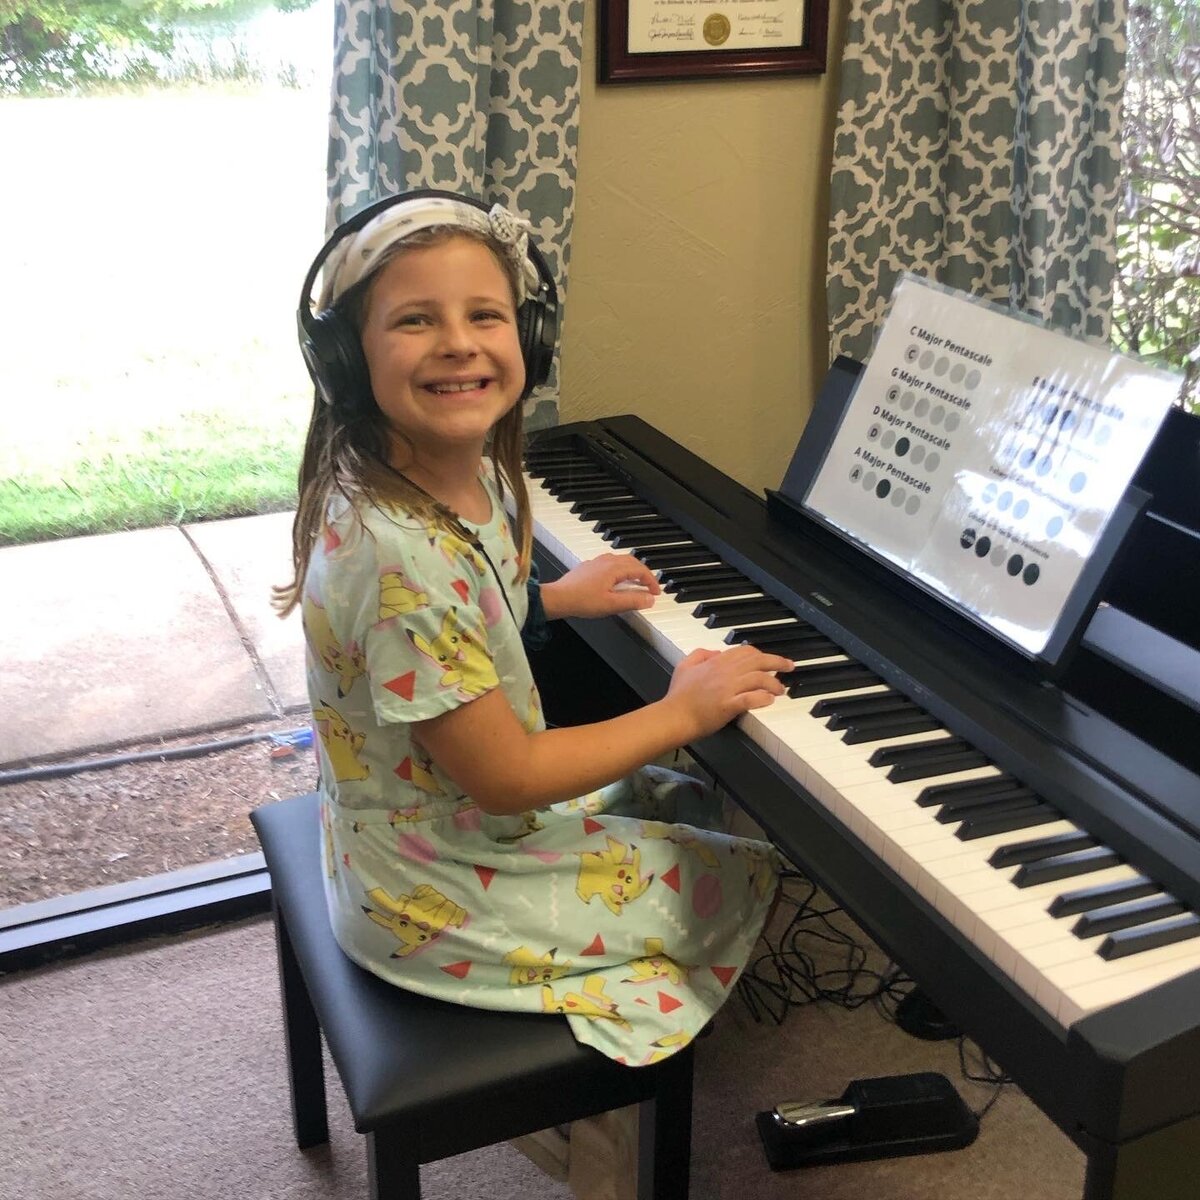 Little Girl learning to play piano in edmond oklahoma